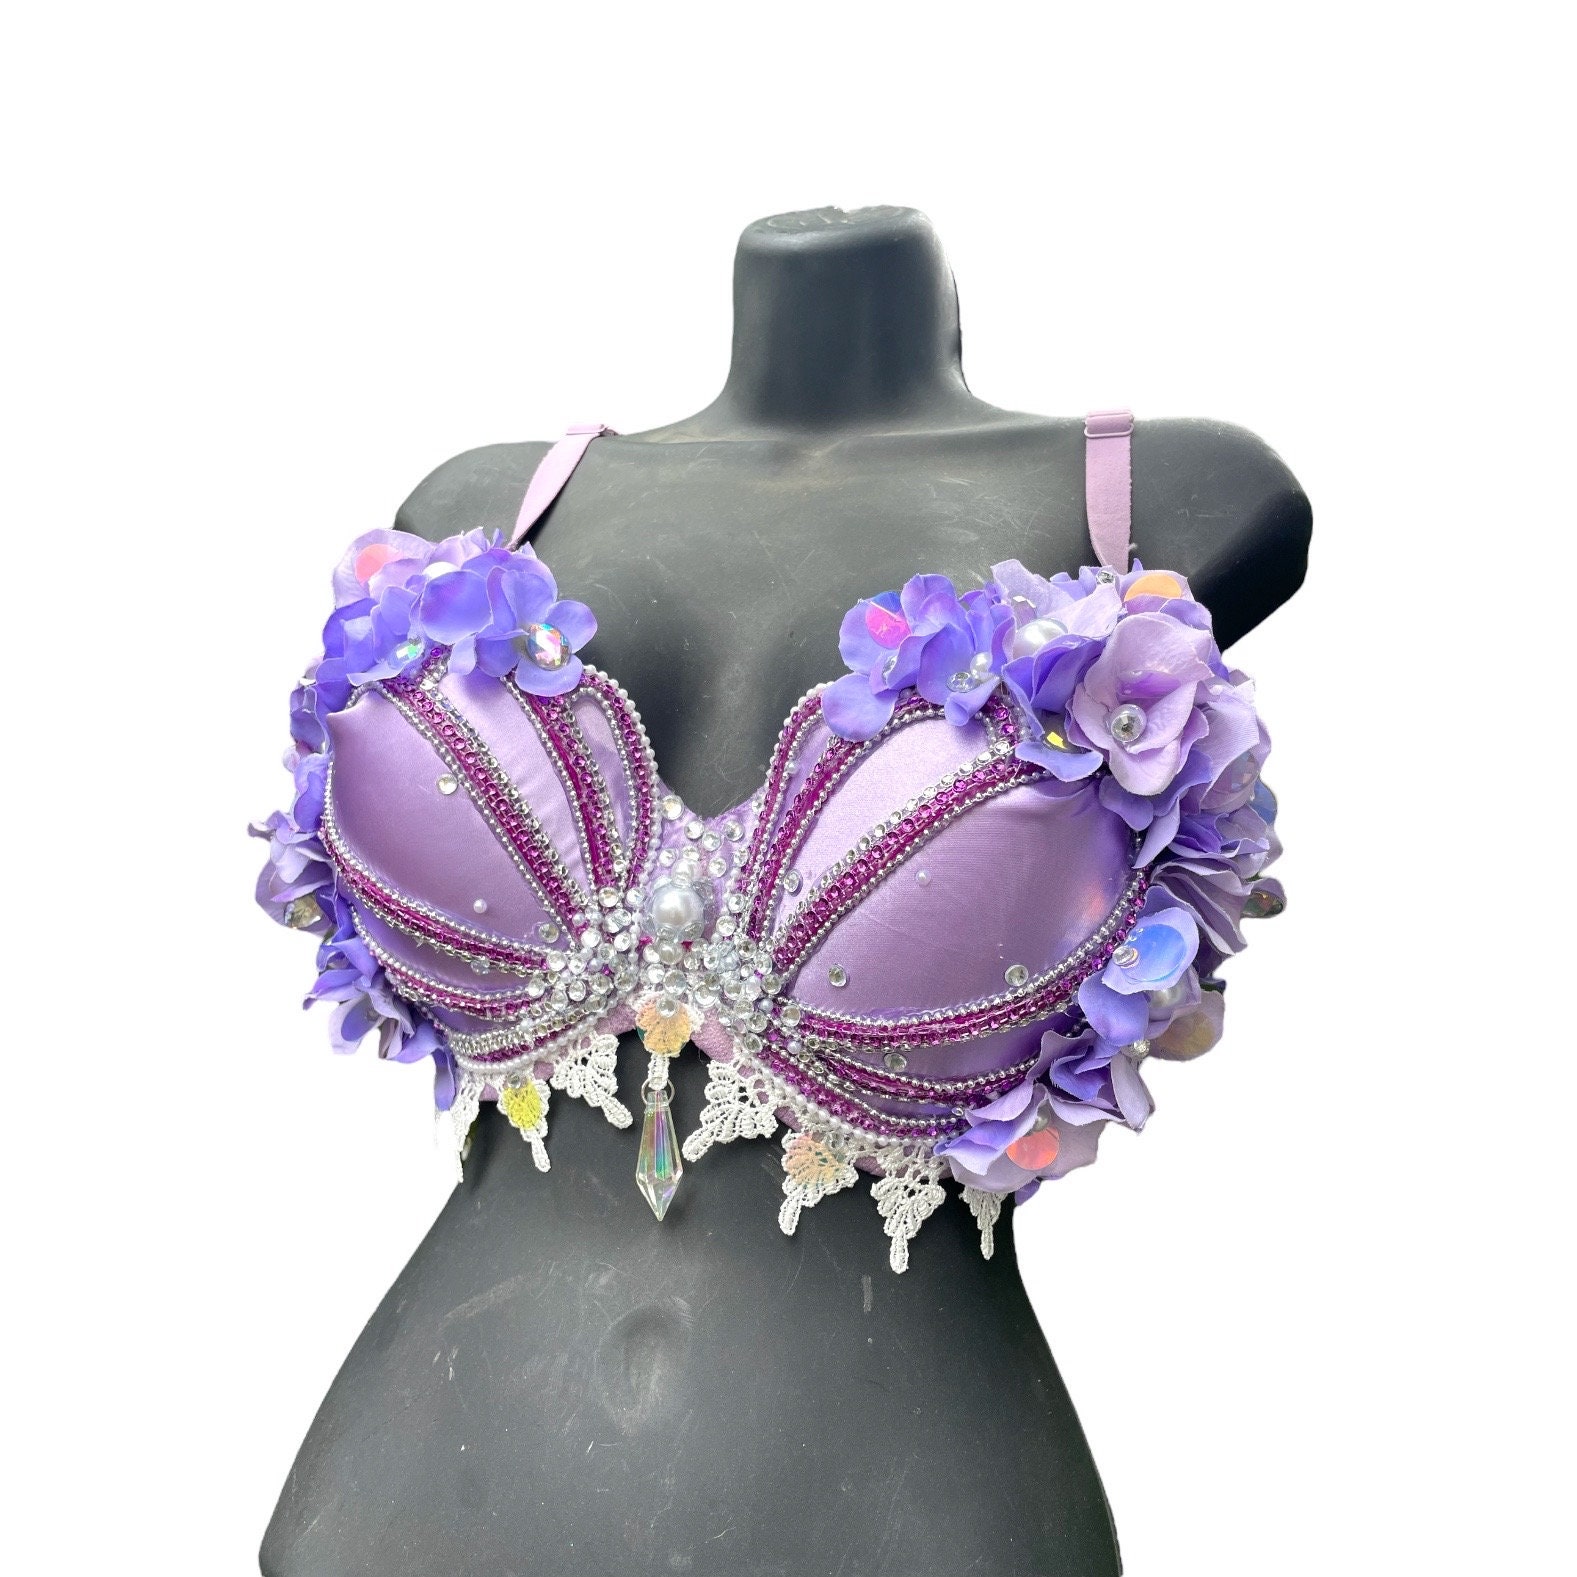 Little Mermaid Purple Rave Bra Top made to Order Item: Featuring a